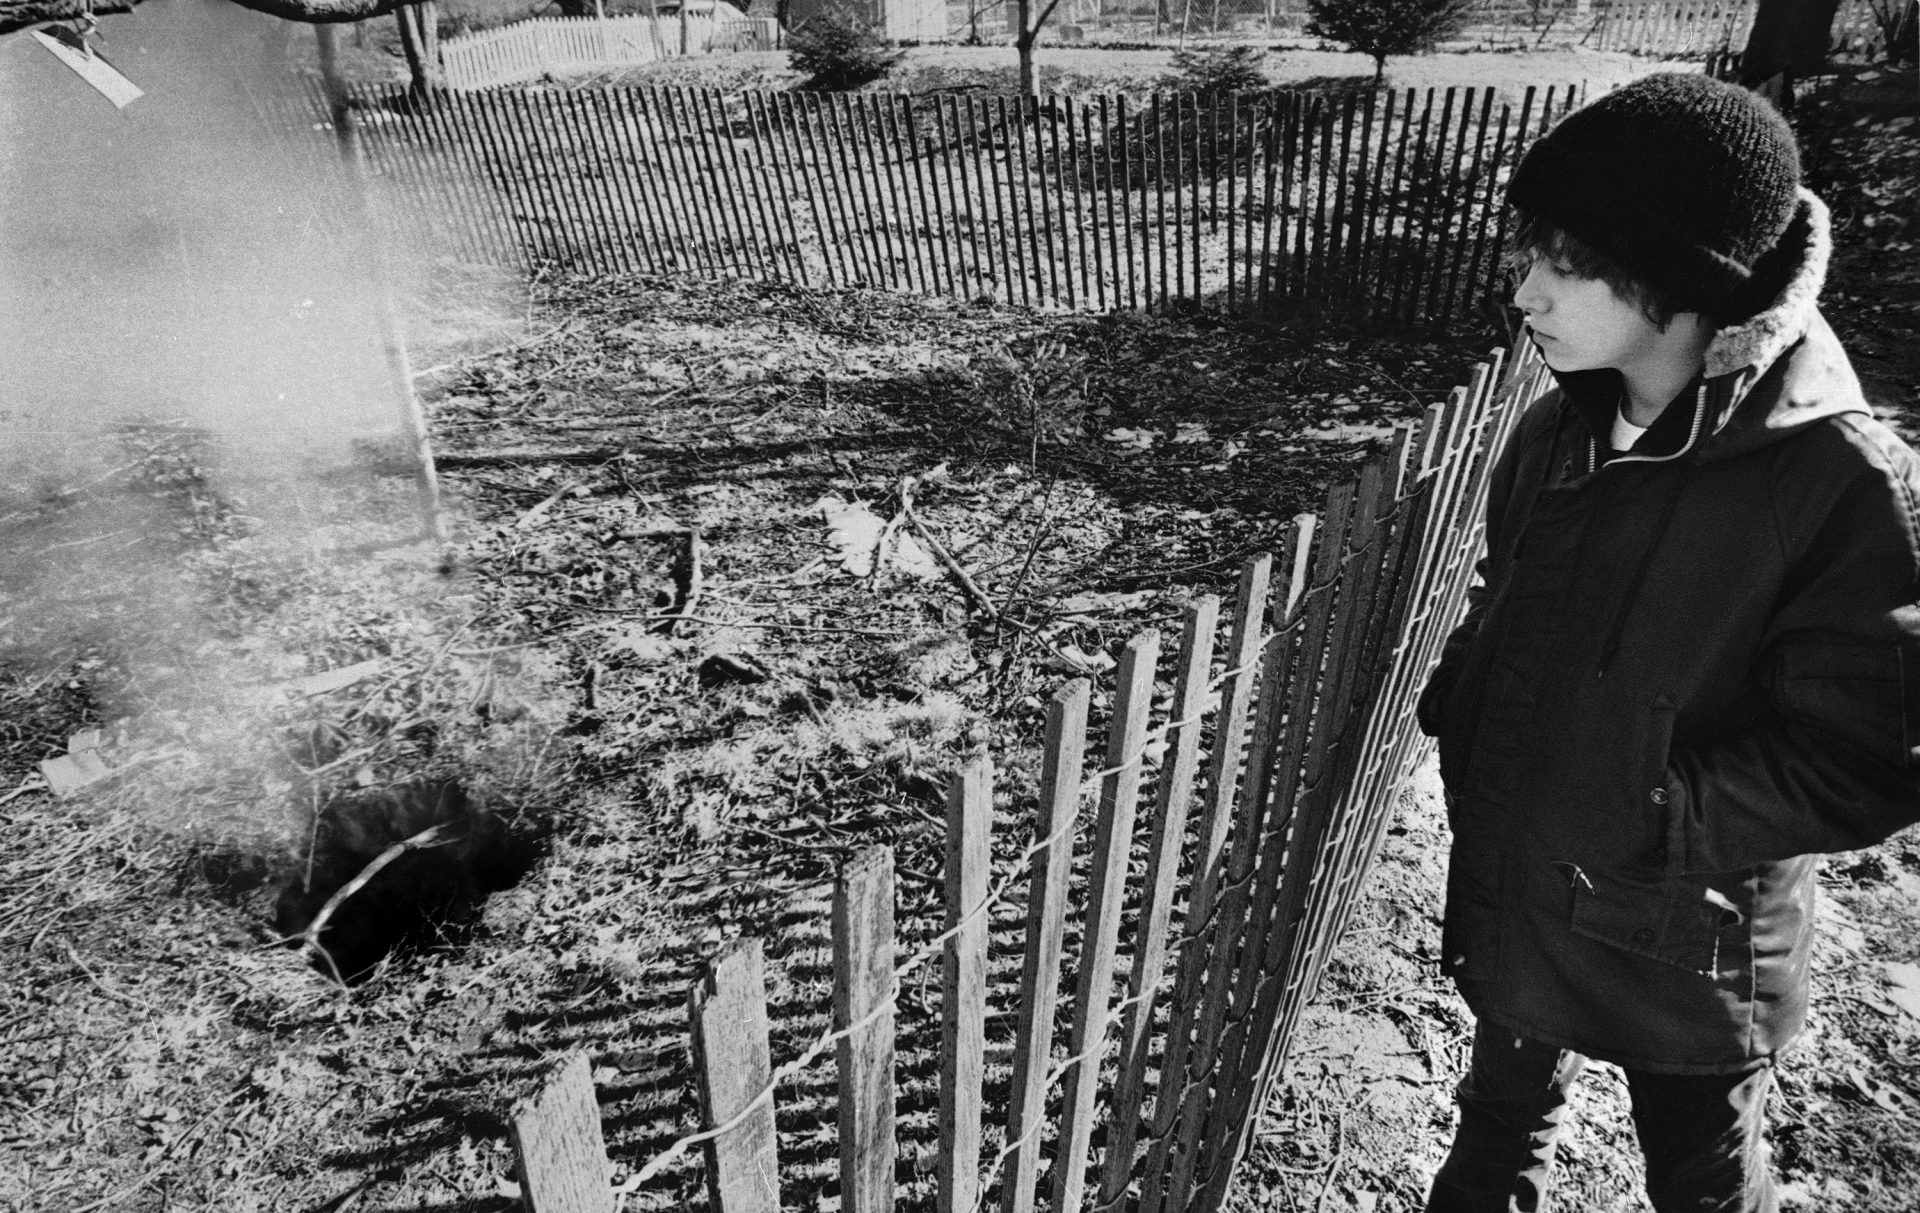 Todd Domboski, 12, of Centralia, Pennsylvania, looks over a police barricade at the hole he fell through just hours before photo was taken on Feb. 14, 1981 in Centralia. The hole was caused by a mine fire that's been burning since 1962.